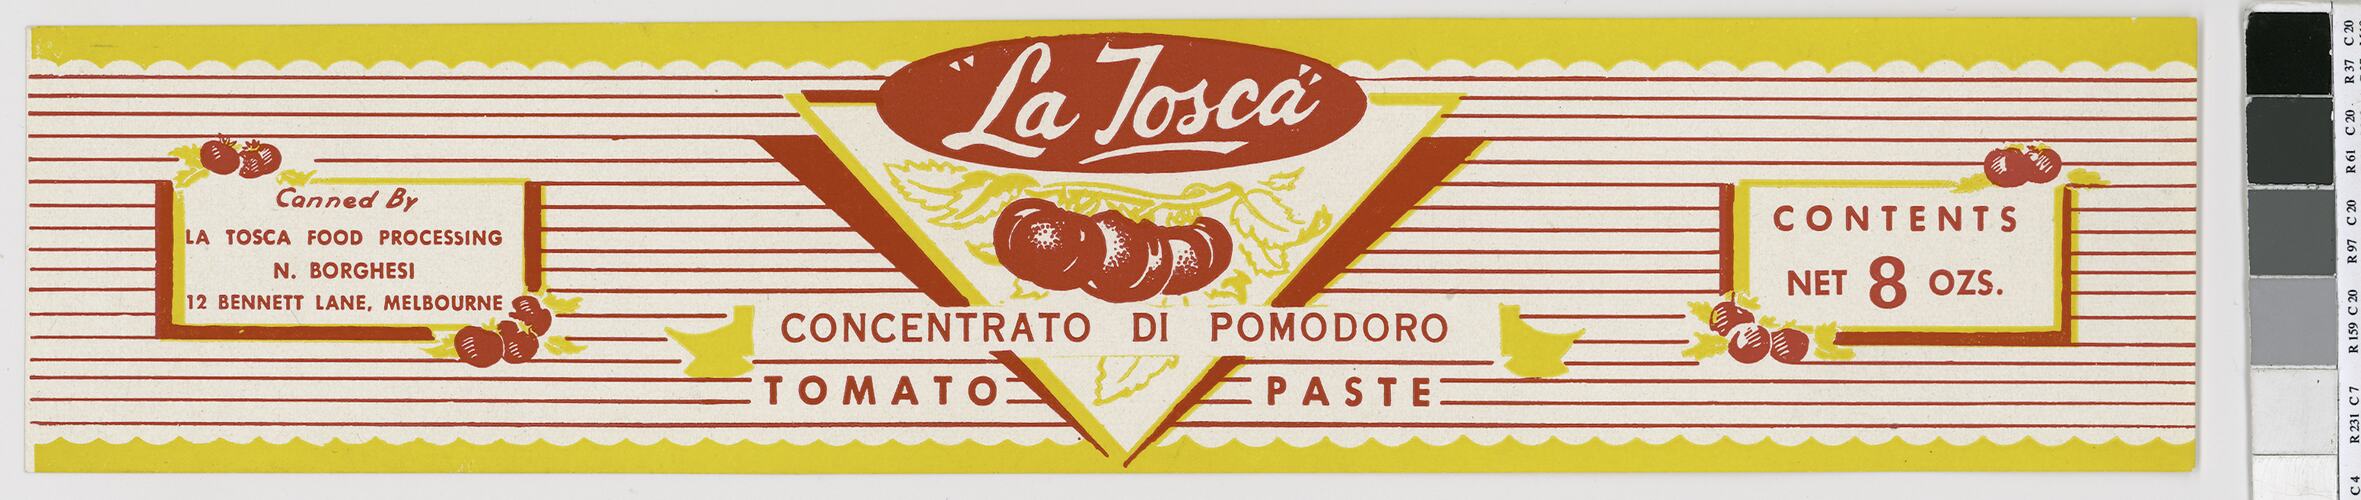 Food Label - La Tosca Concentrated Tomato Paste, 1950s